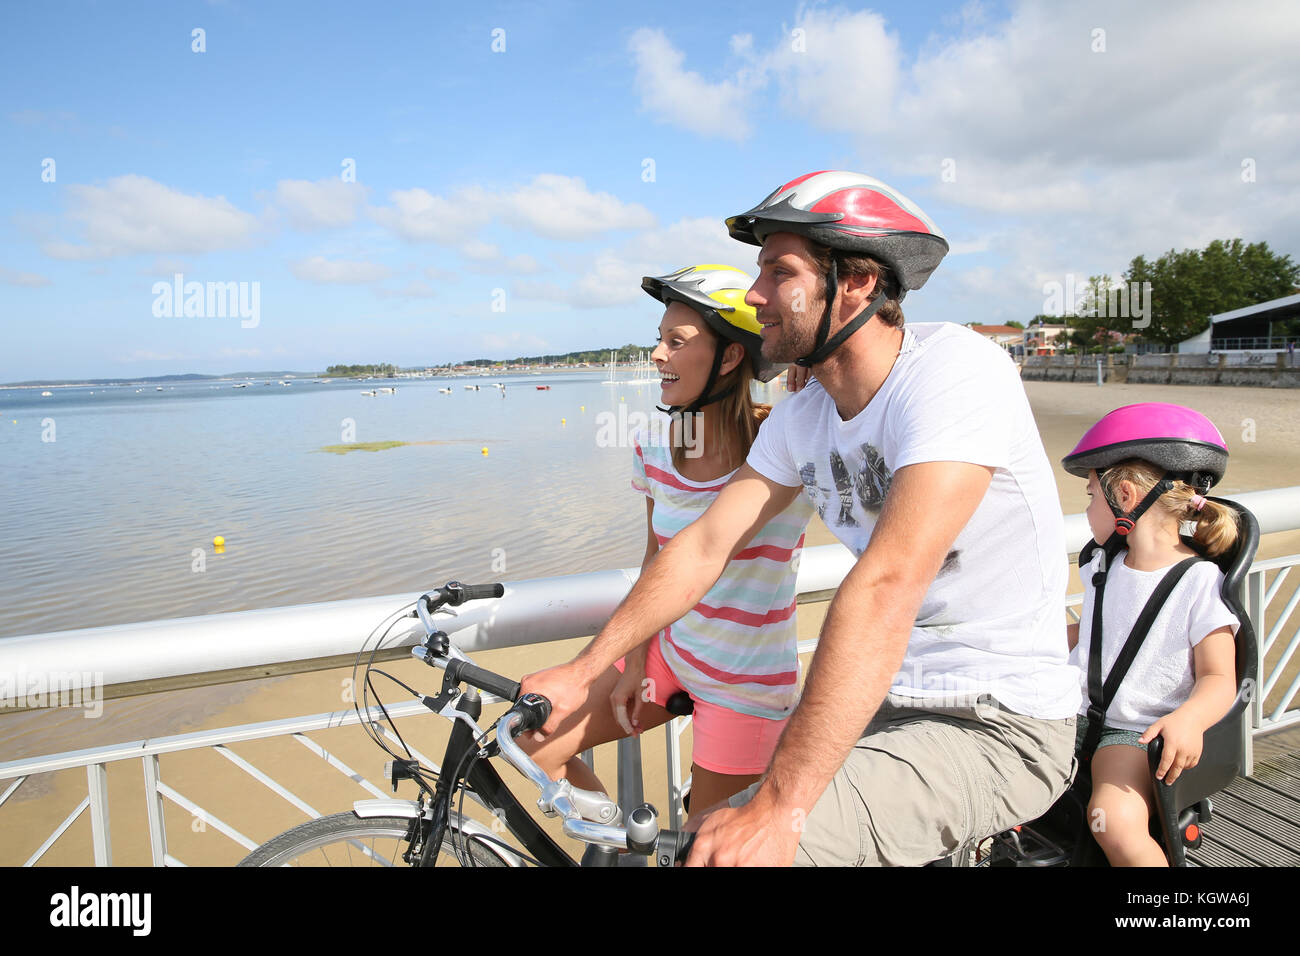 Family on a biking journey by the sea Stock Photo